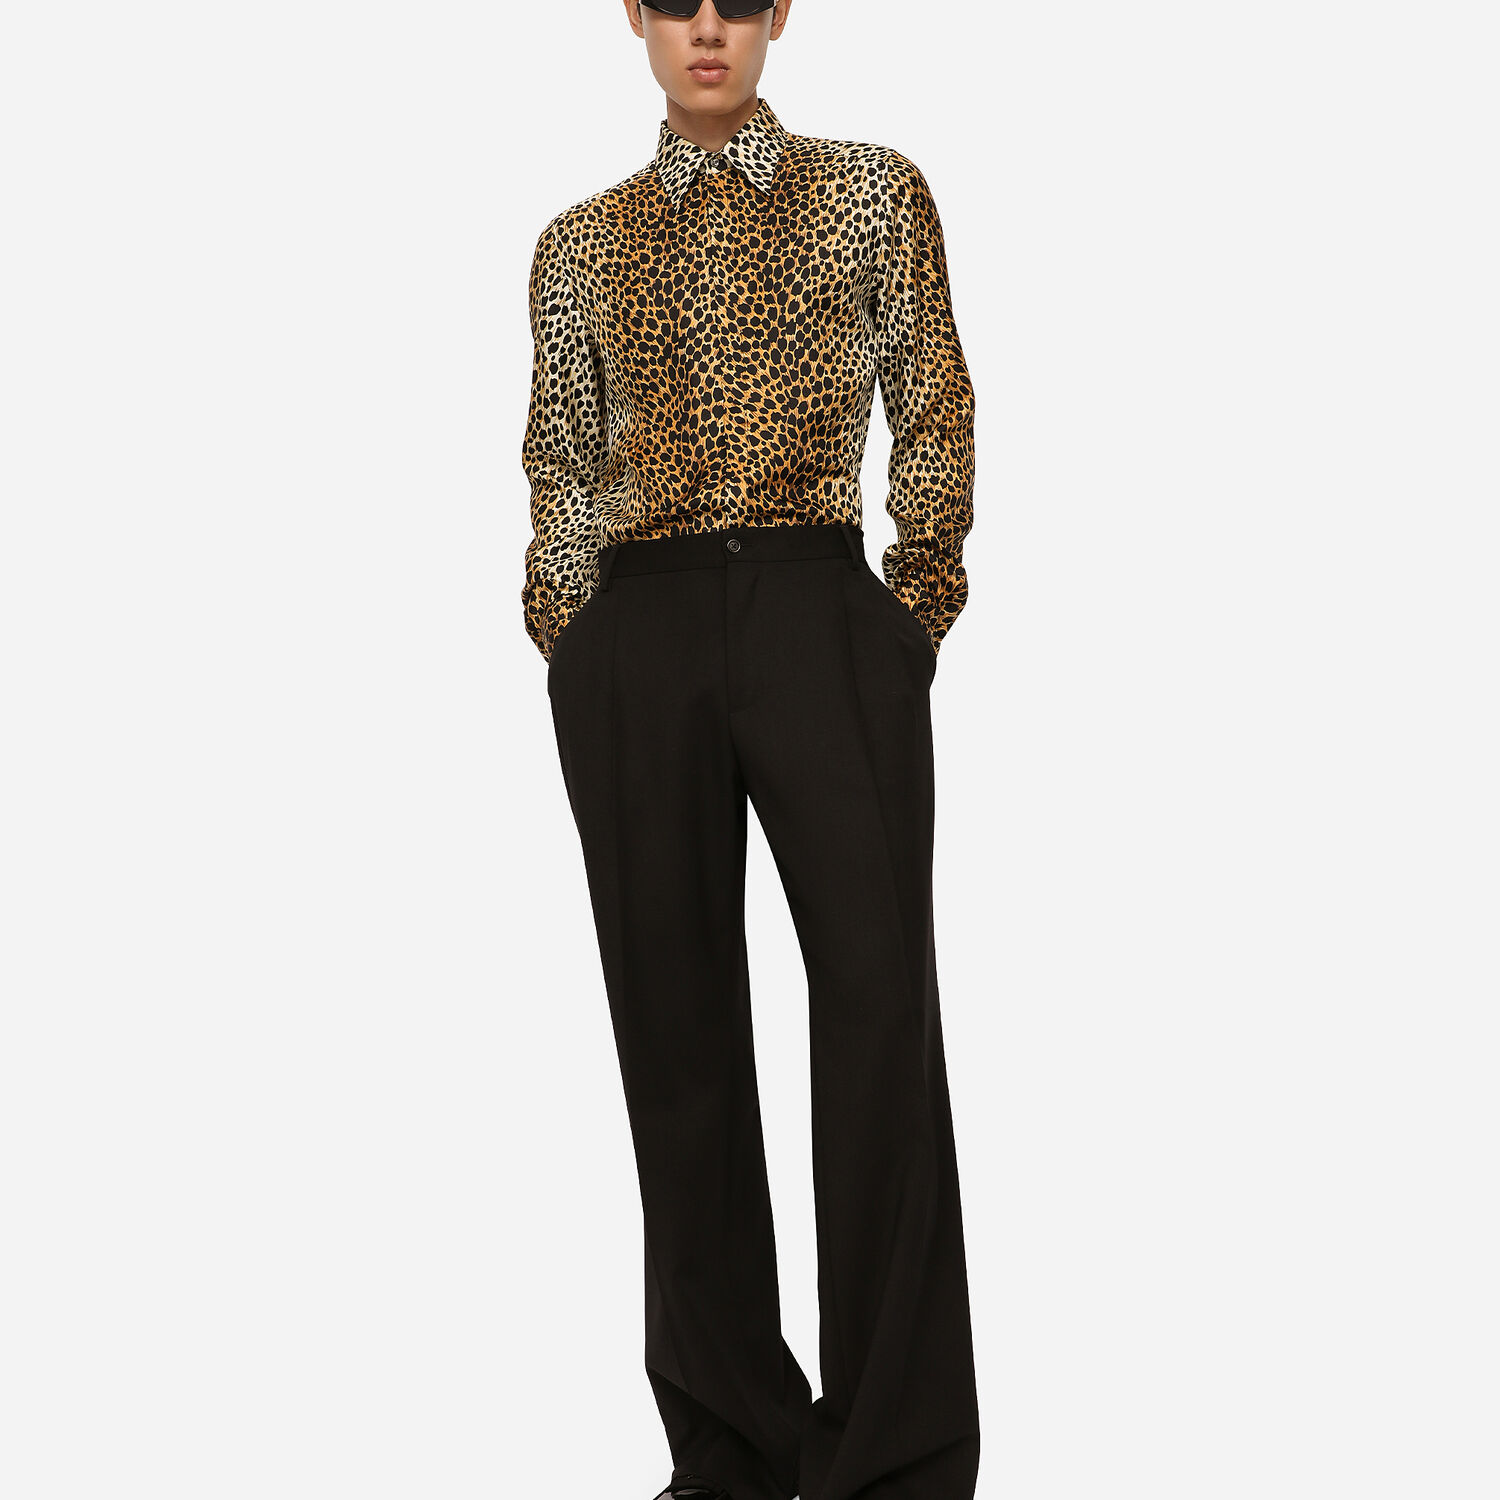 Silk twill Martini-fit | Multicolor ocelot print in for shirt Dolce&Gabbana® with US